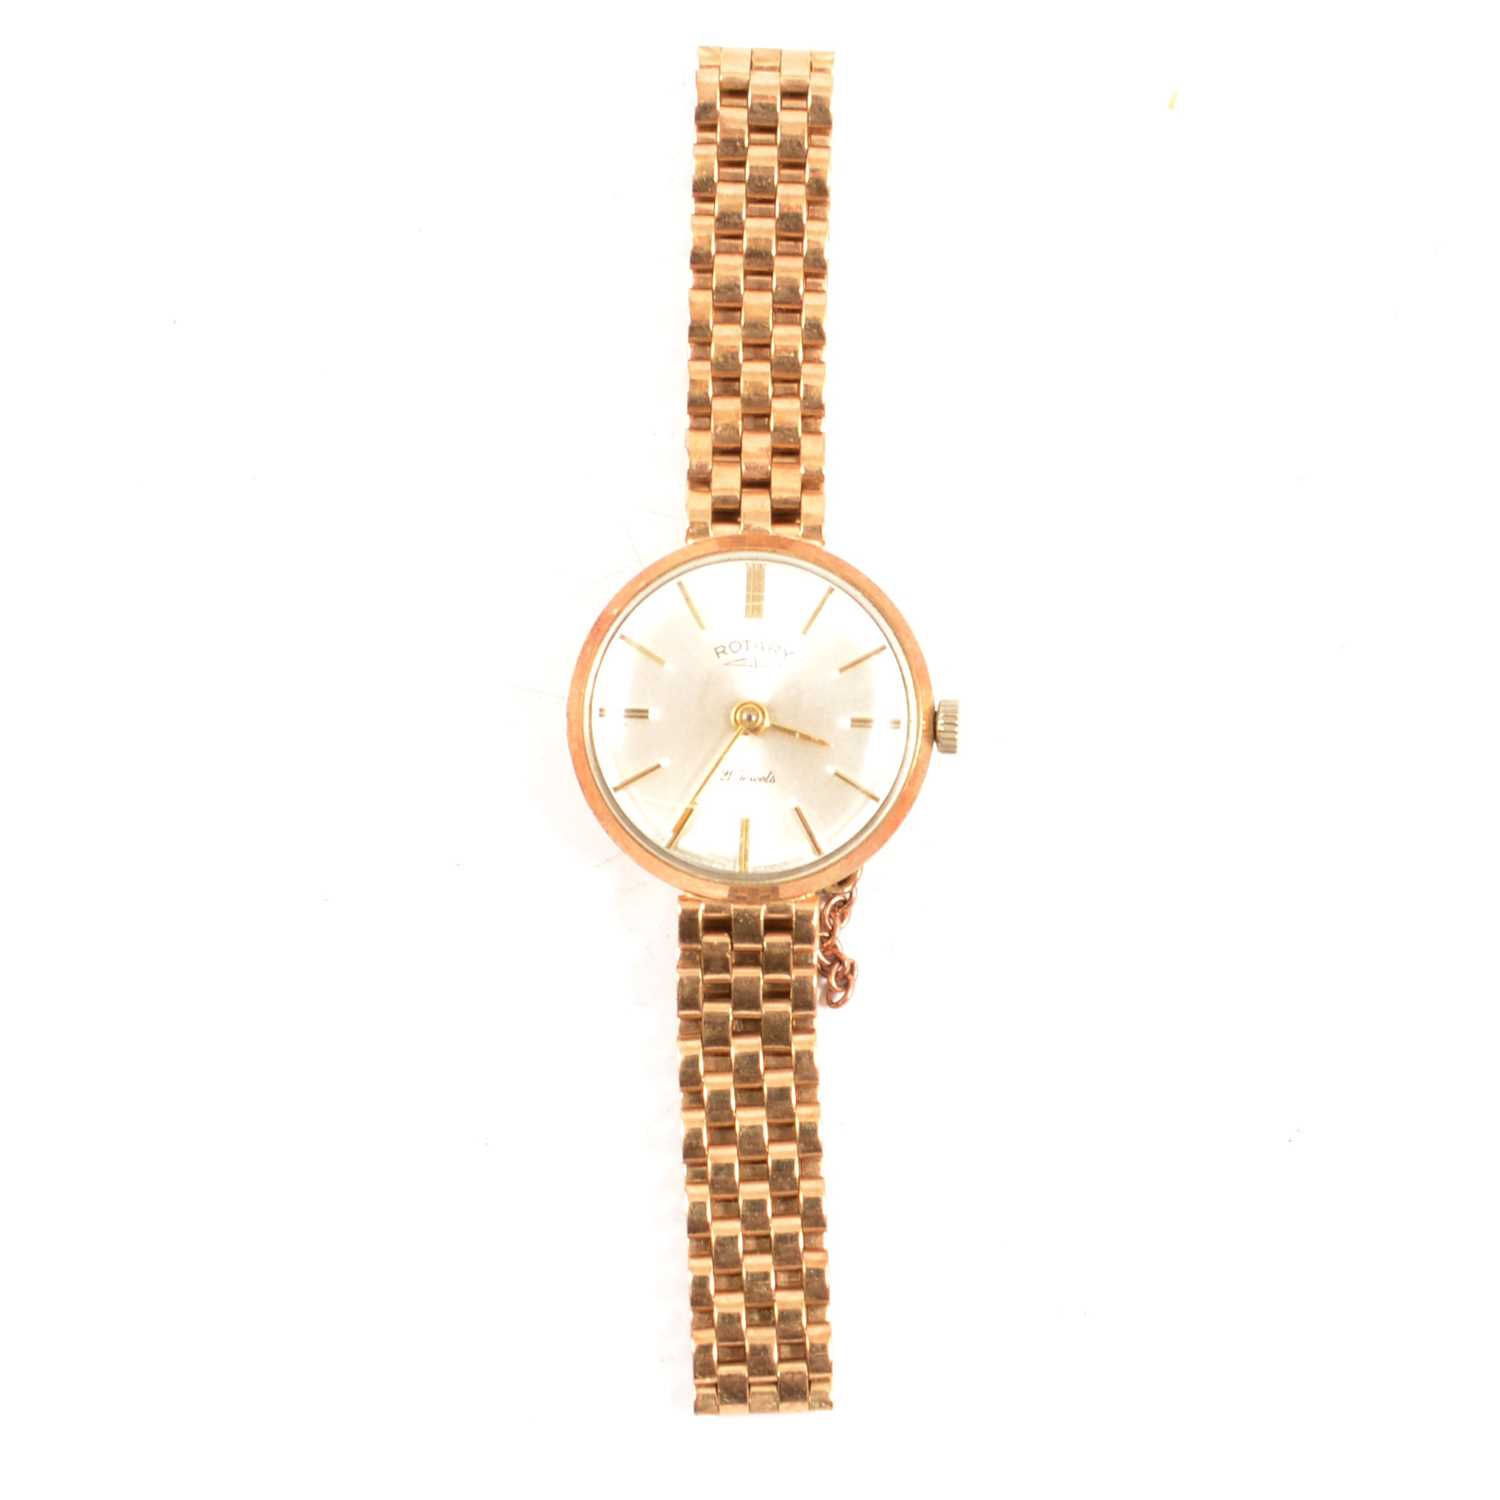 Rotary Watches Ladies Rotary Oxford diamondset dial bracelet watch  LB0509207  Watches from Peplow Jewellers UK